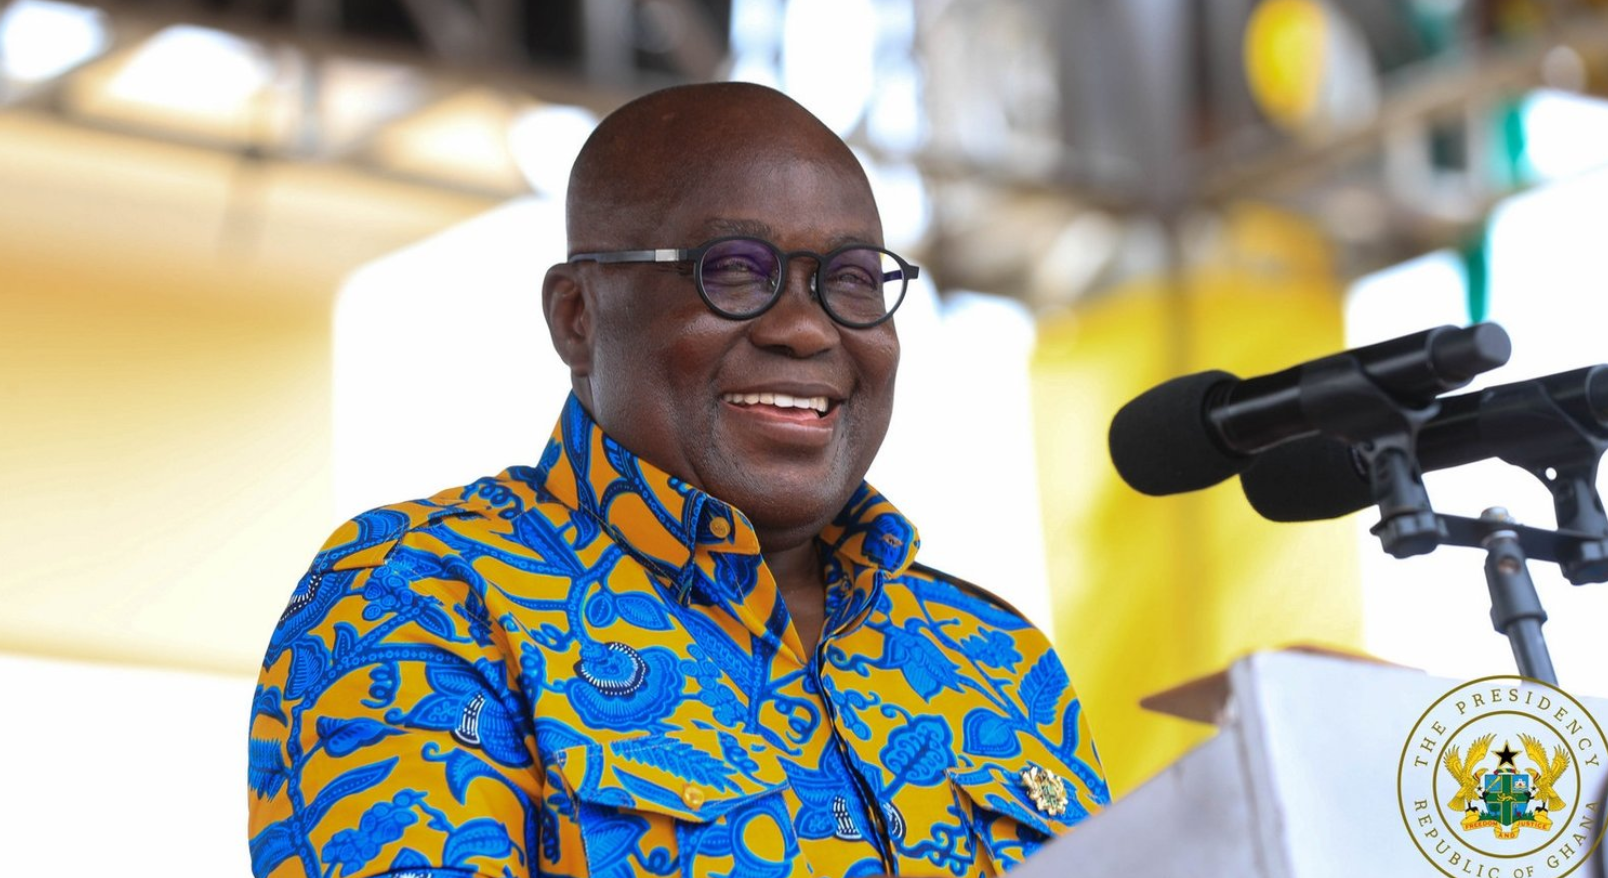 NPP accuses opposition NDC of the heckling of Prez, Nana Akufo Addo at the Global Citizen Festival